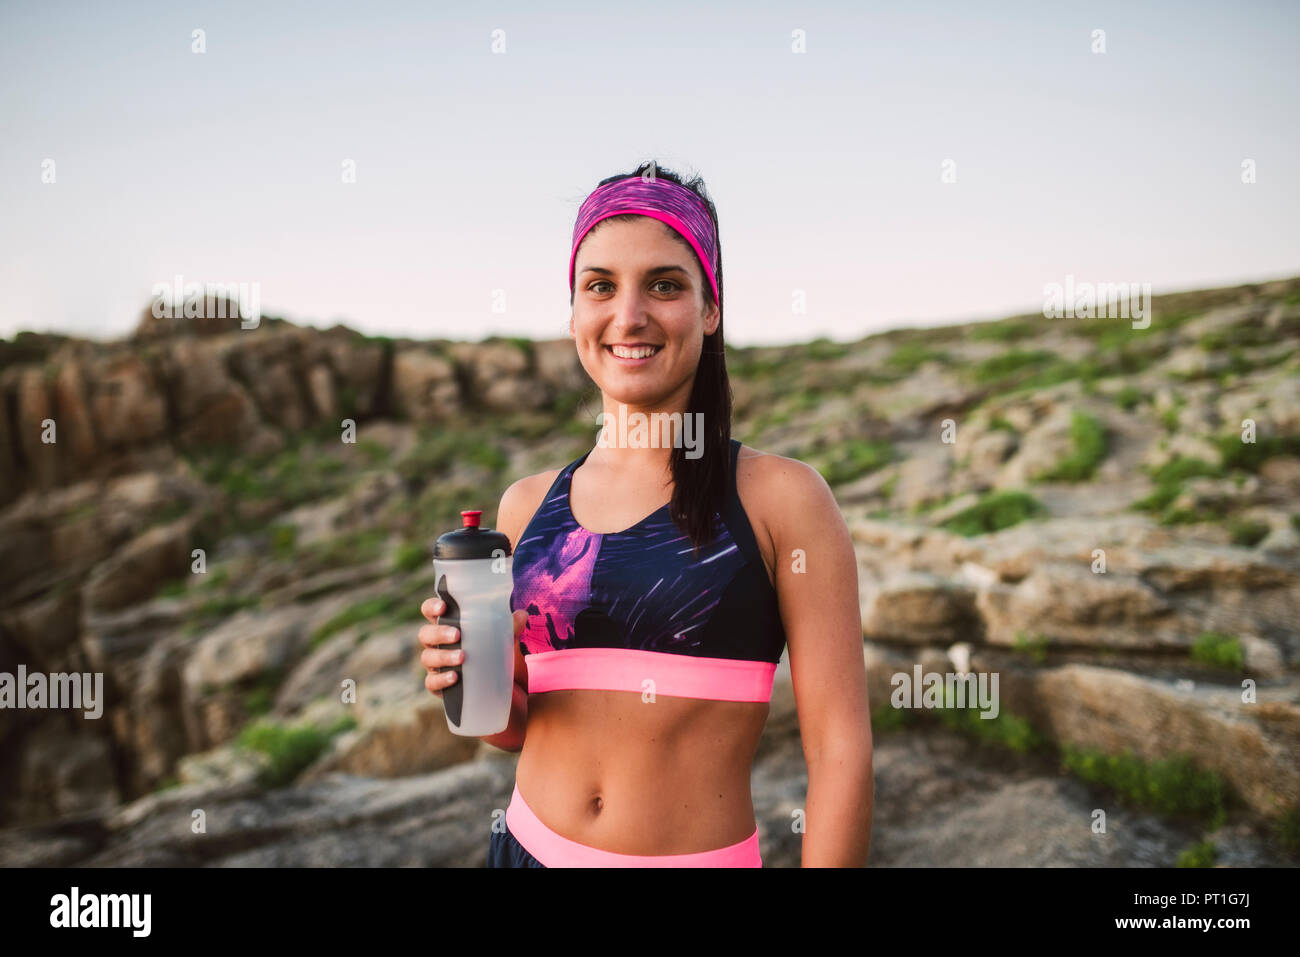 Portrait of an athlete woman drinking water outdoors Stock Photo